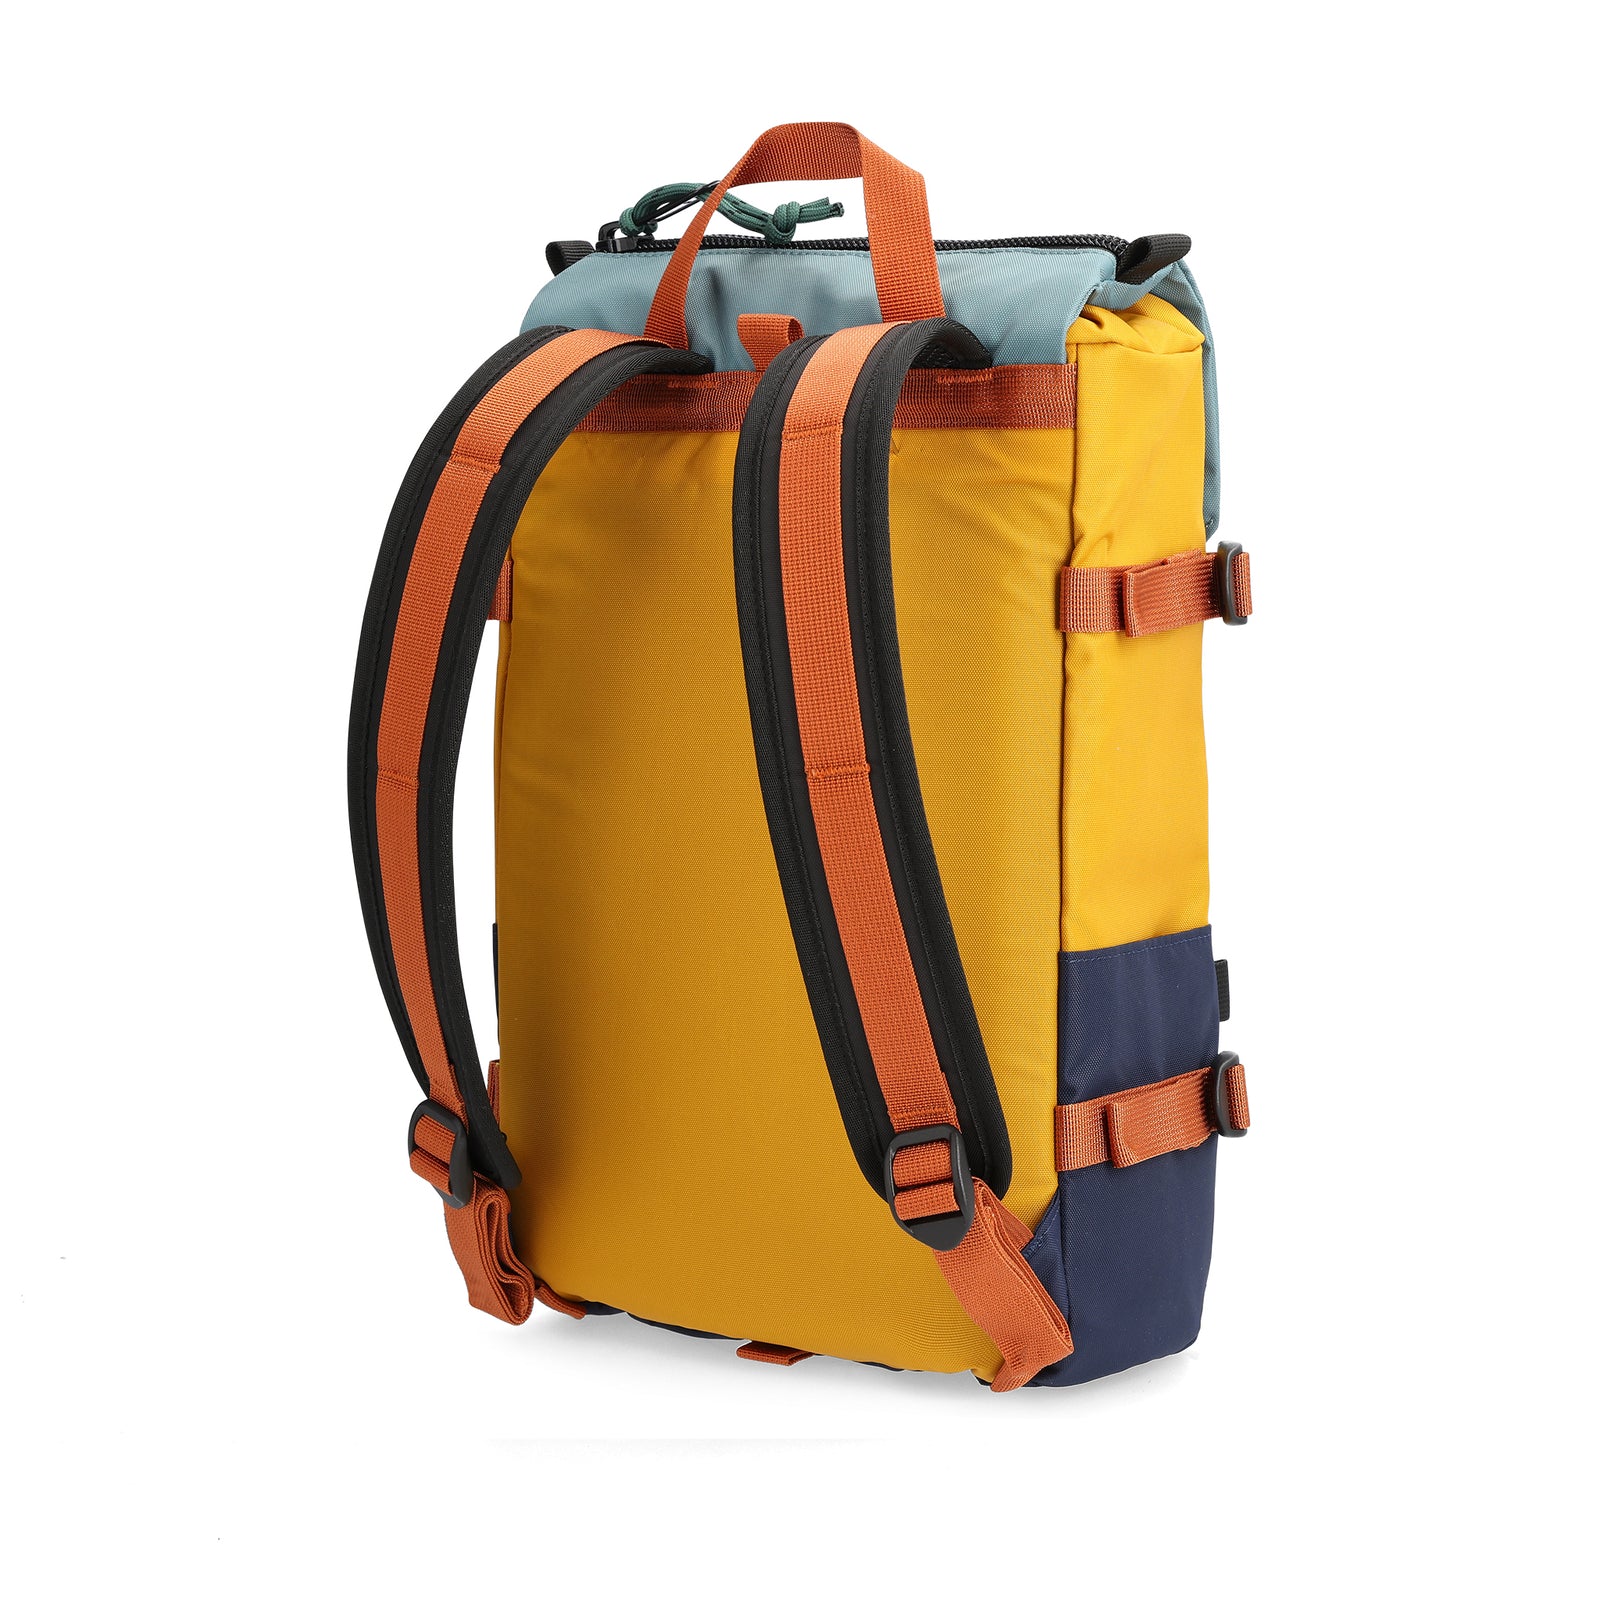 Back View of Topo Designs Rover Pack Mini in "Navy / Mustard"